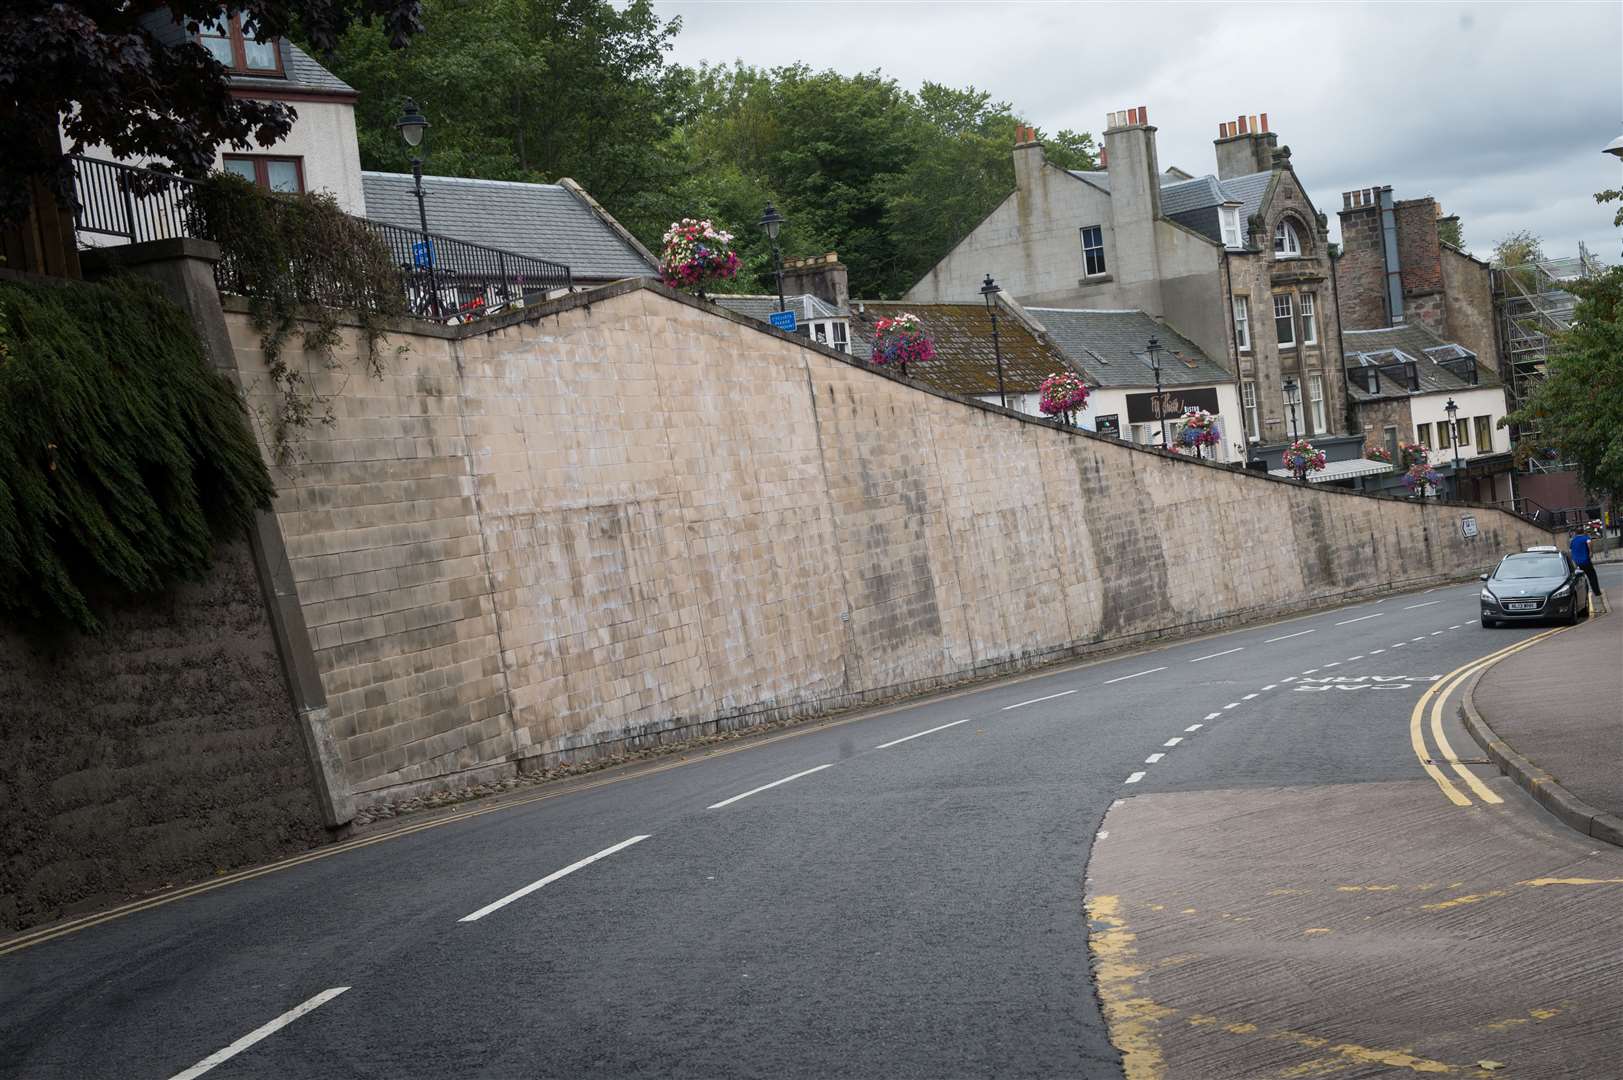 Crown Road Wall is currently bare and uninspiring, but could soon be transformed.